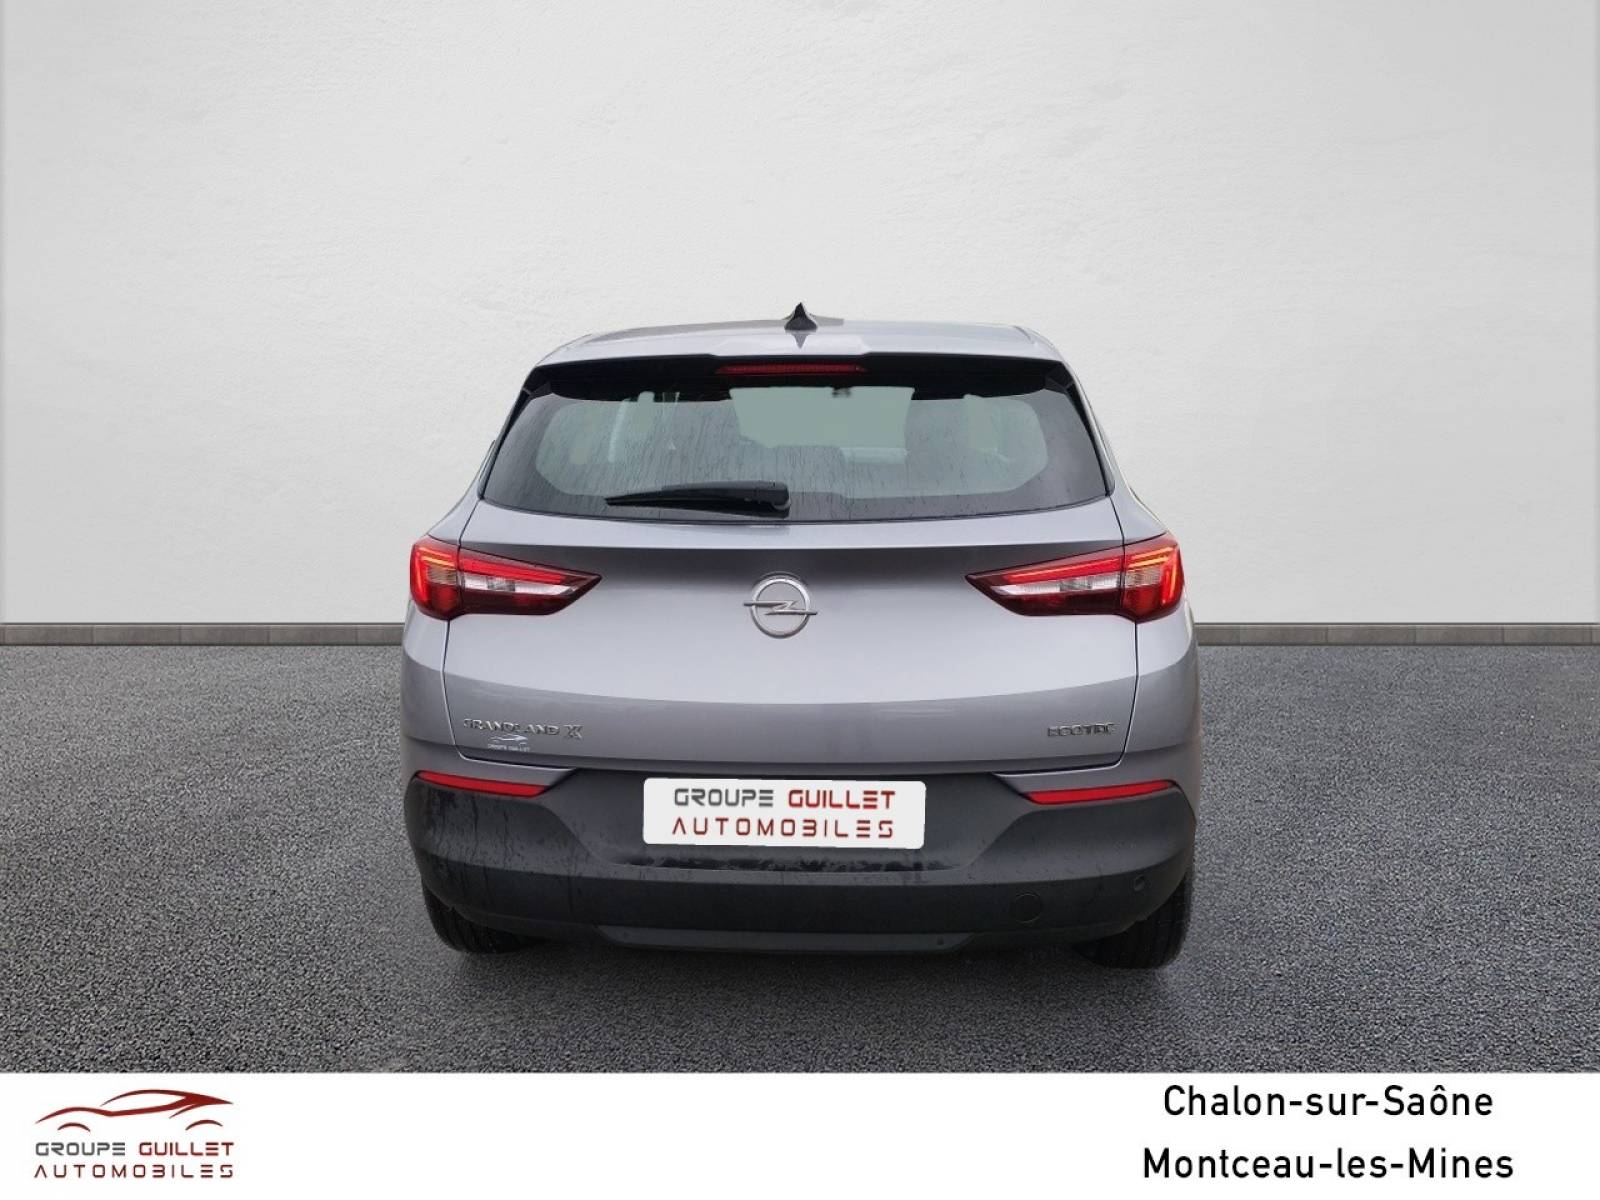 OPEL Grandland X 1.2 Turbo 130 ch - véhicule d'occasion - Groupe Guillet - Opel Magicauto Chalon - 71380 - Saint-Marcel - 5